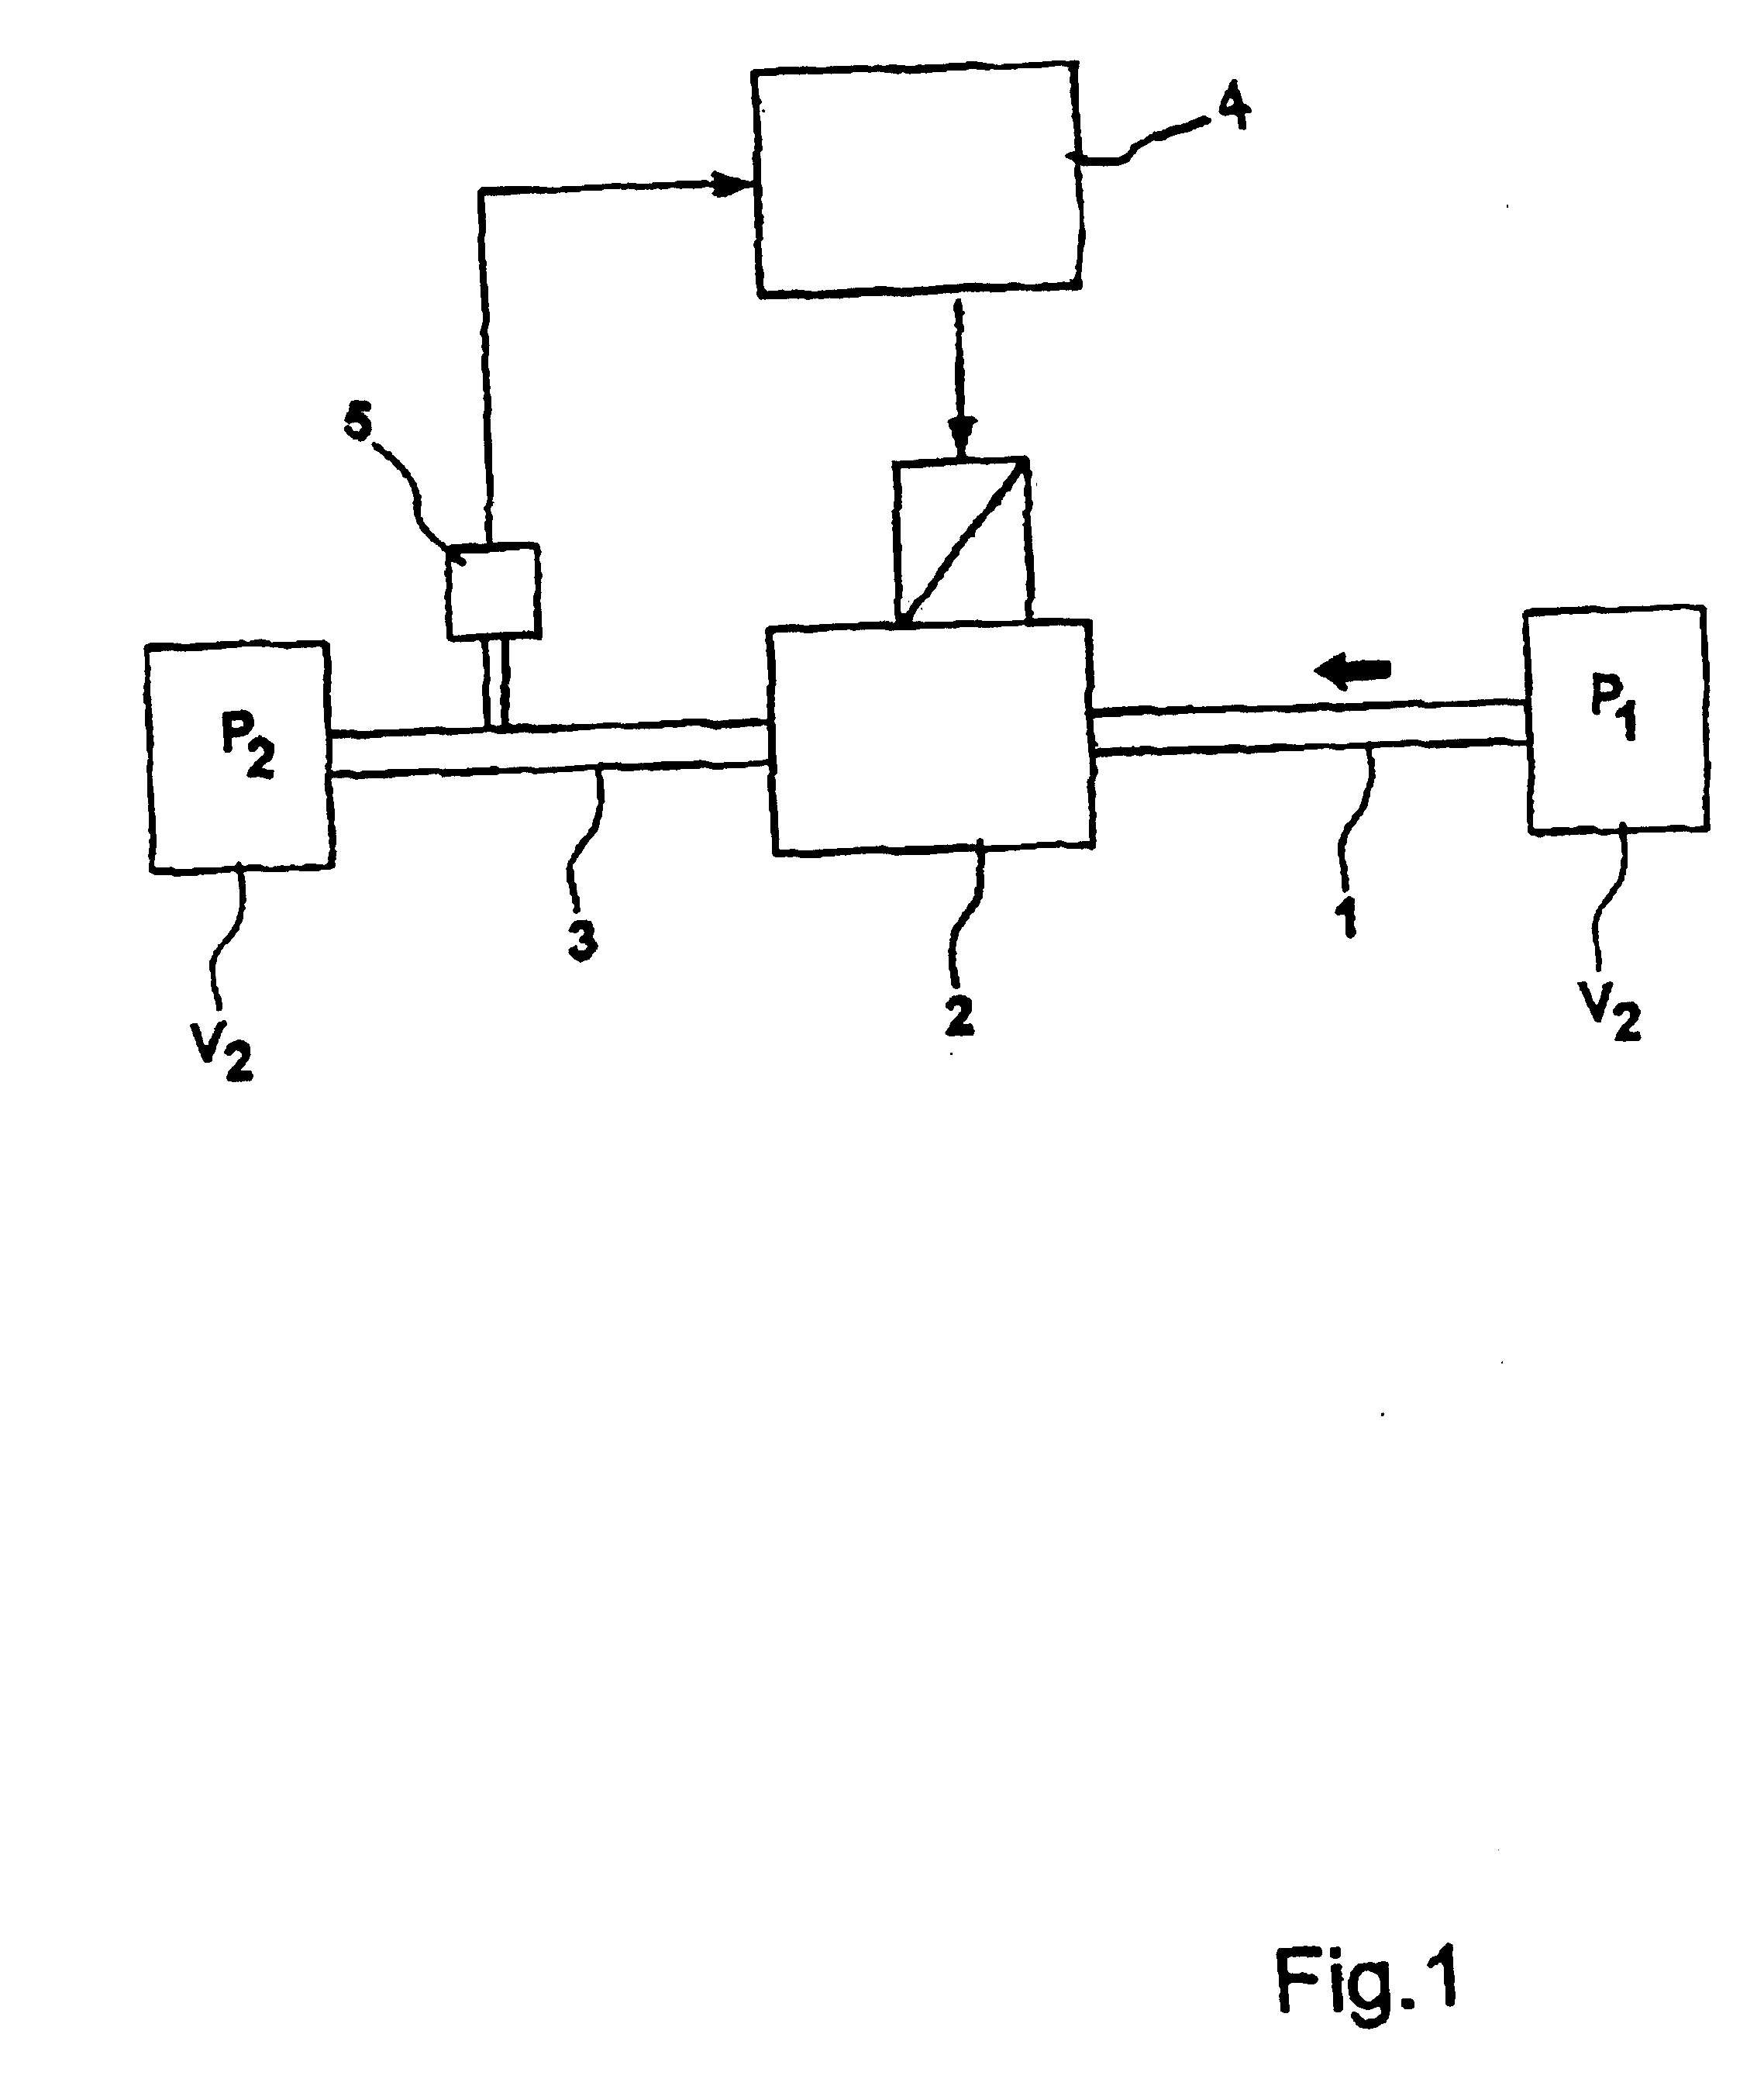 Method and apparatus for monitoring a controllable valve